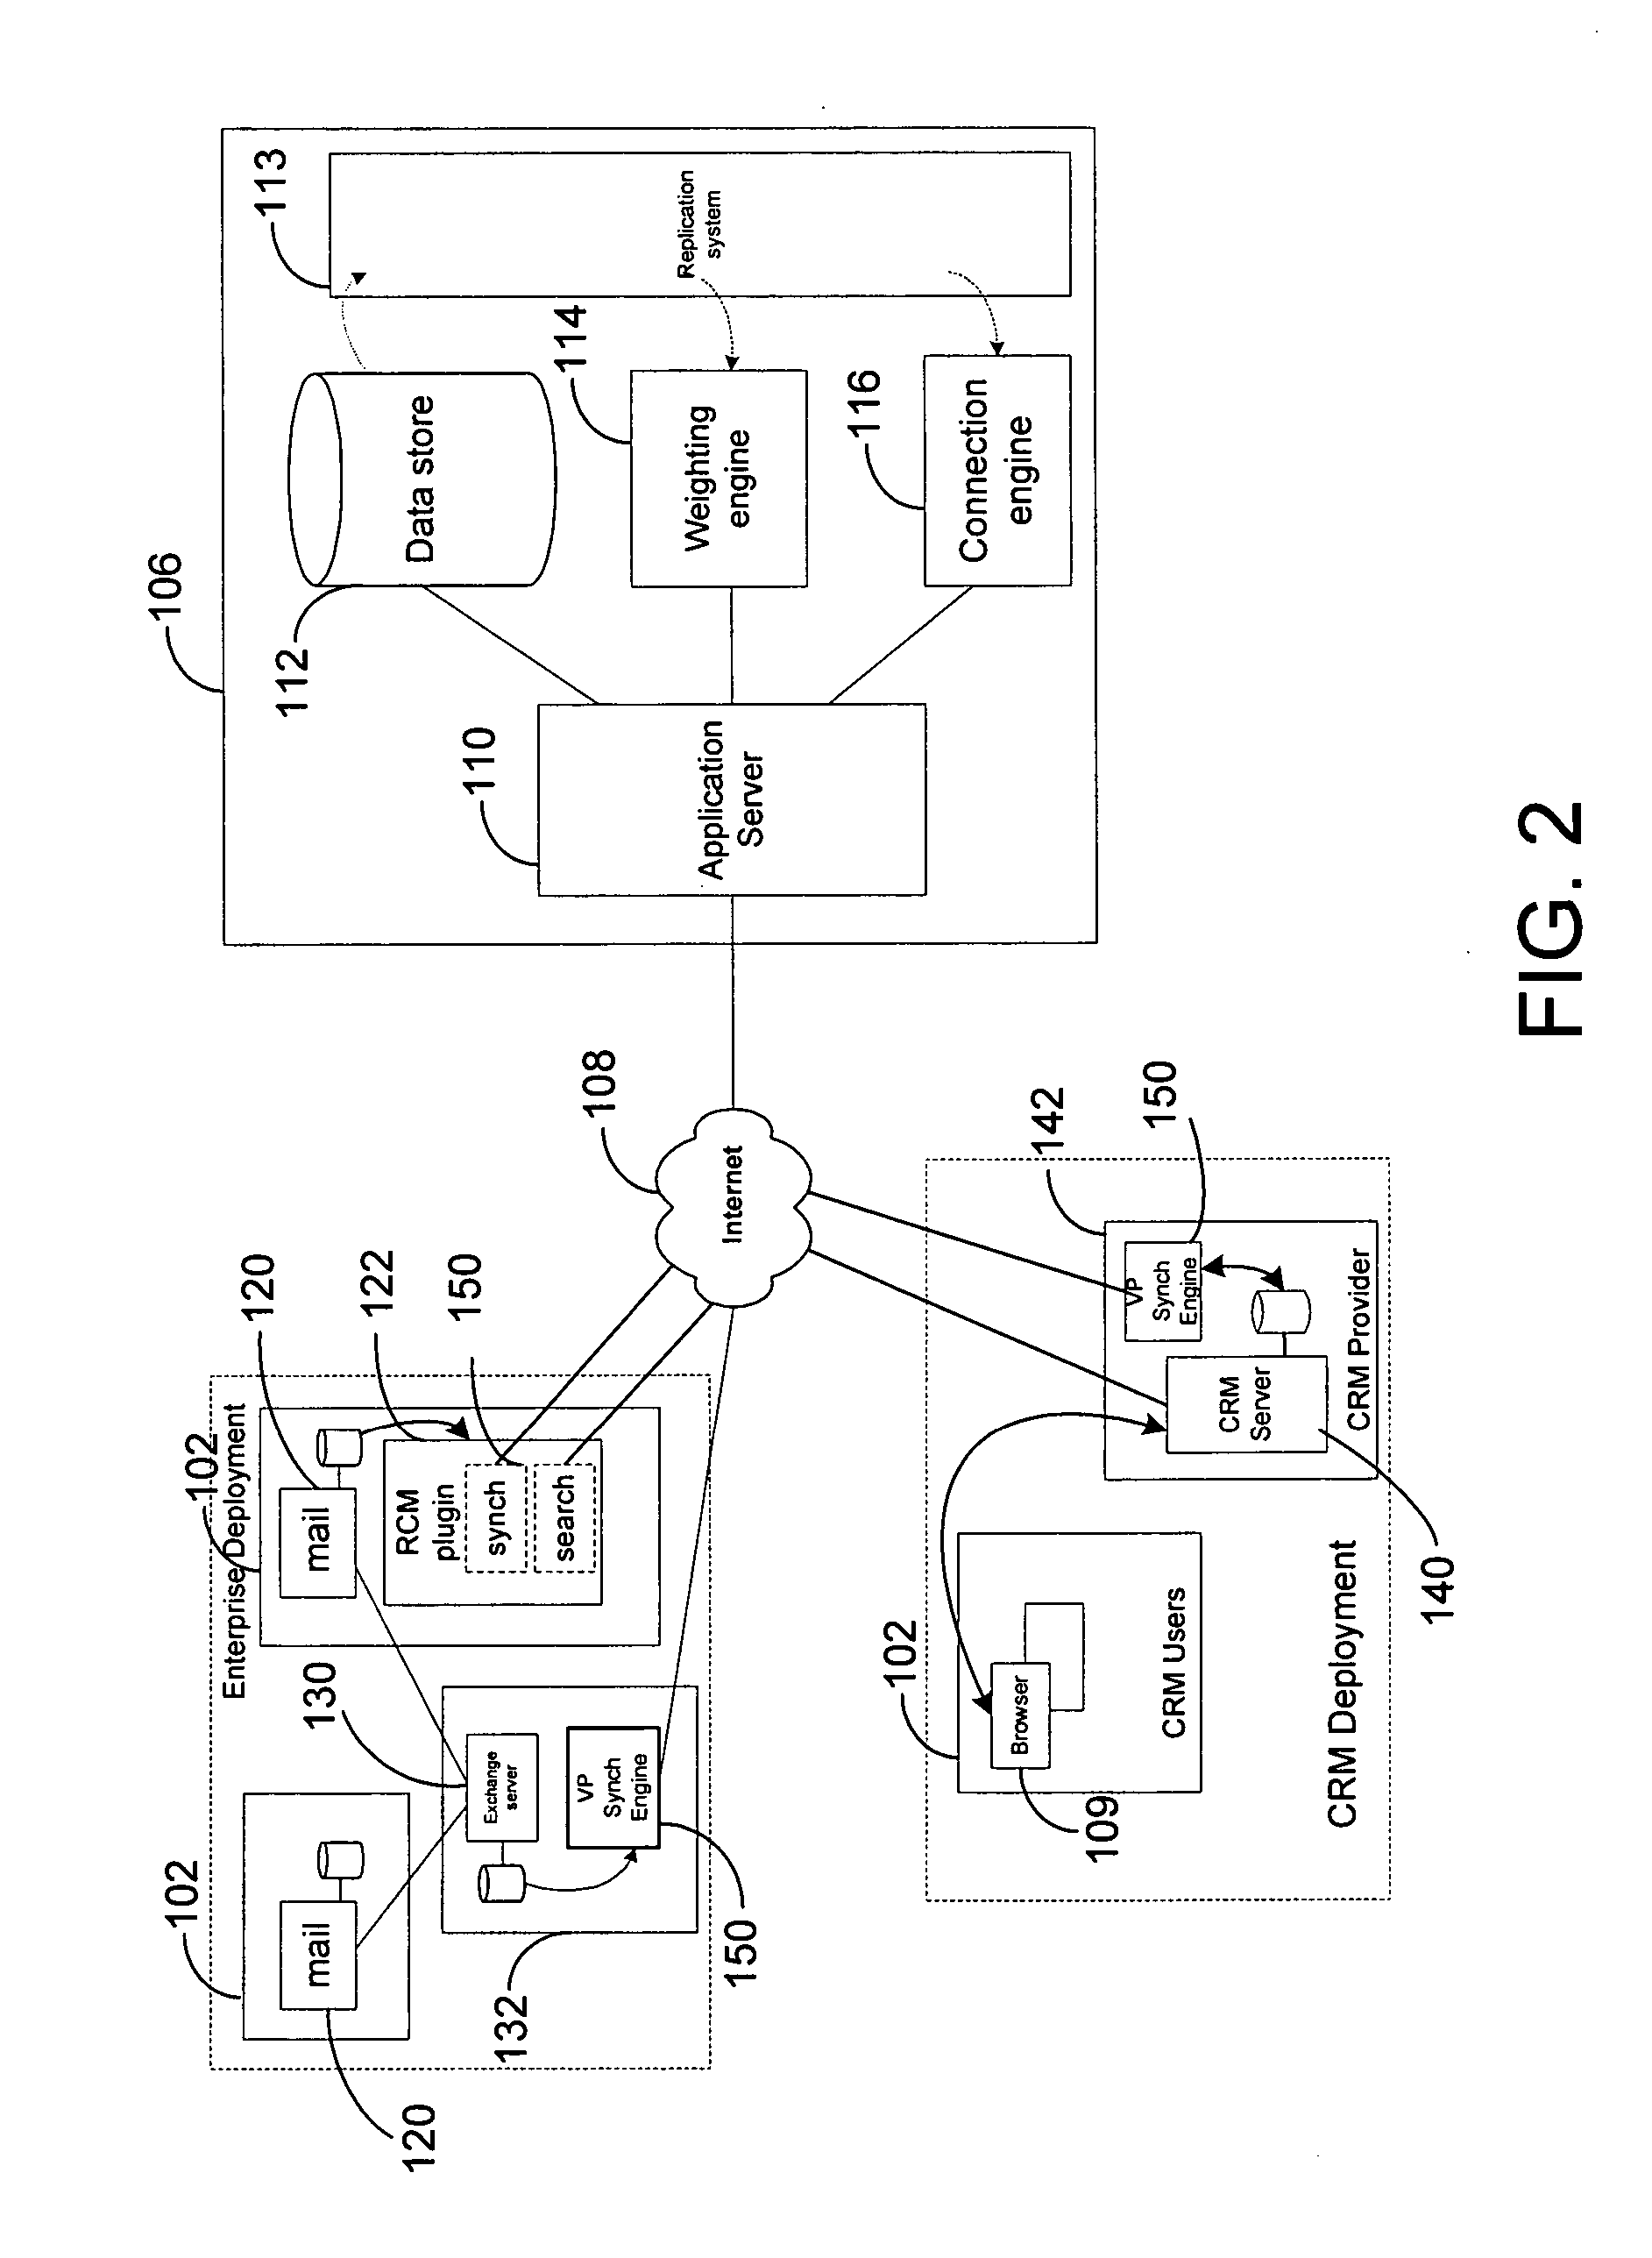 System and method for enforcing privacy in social networks